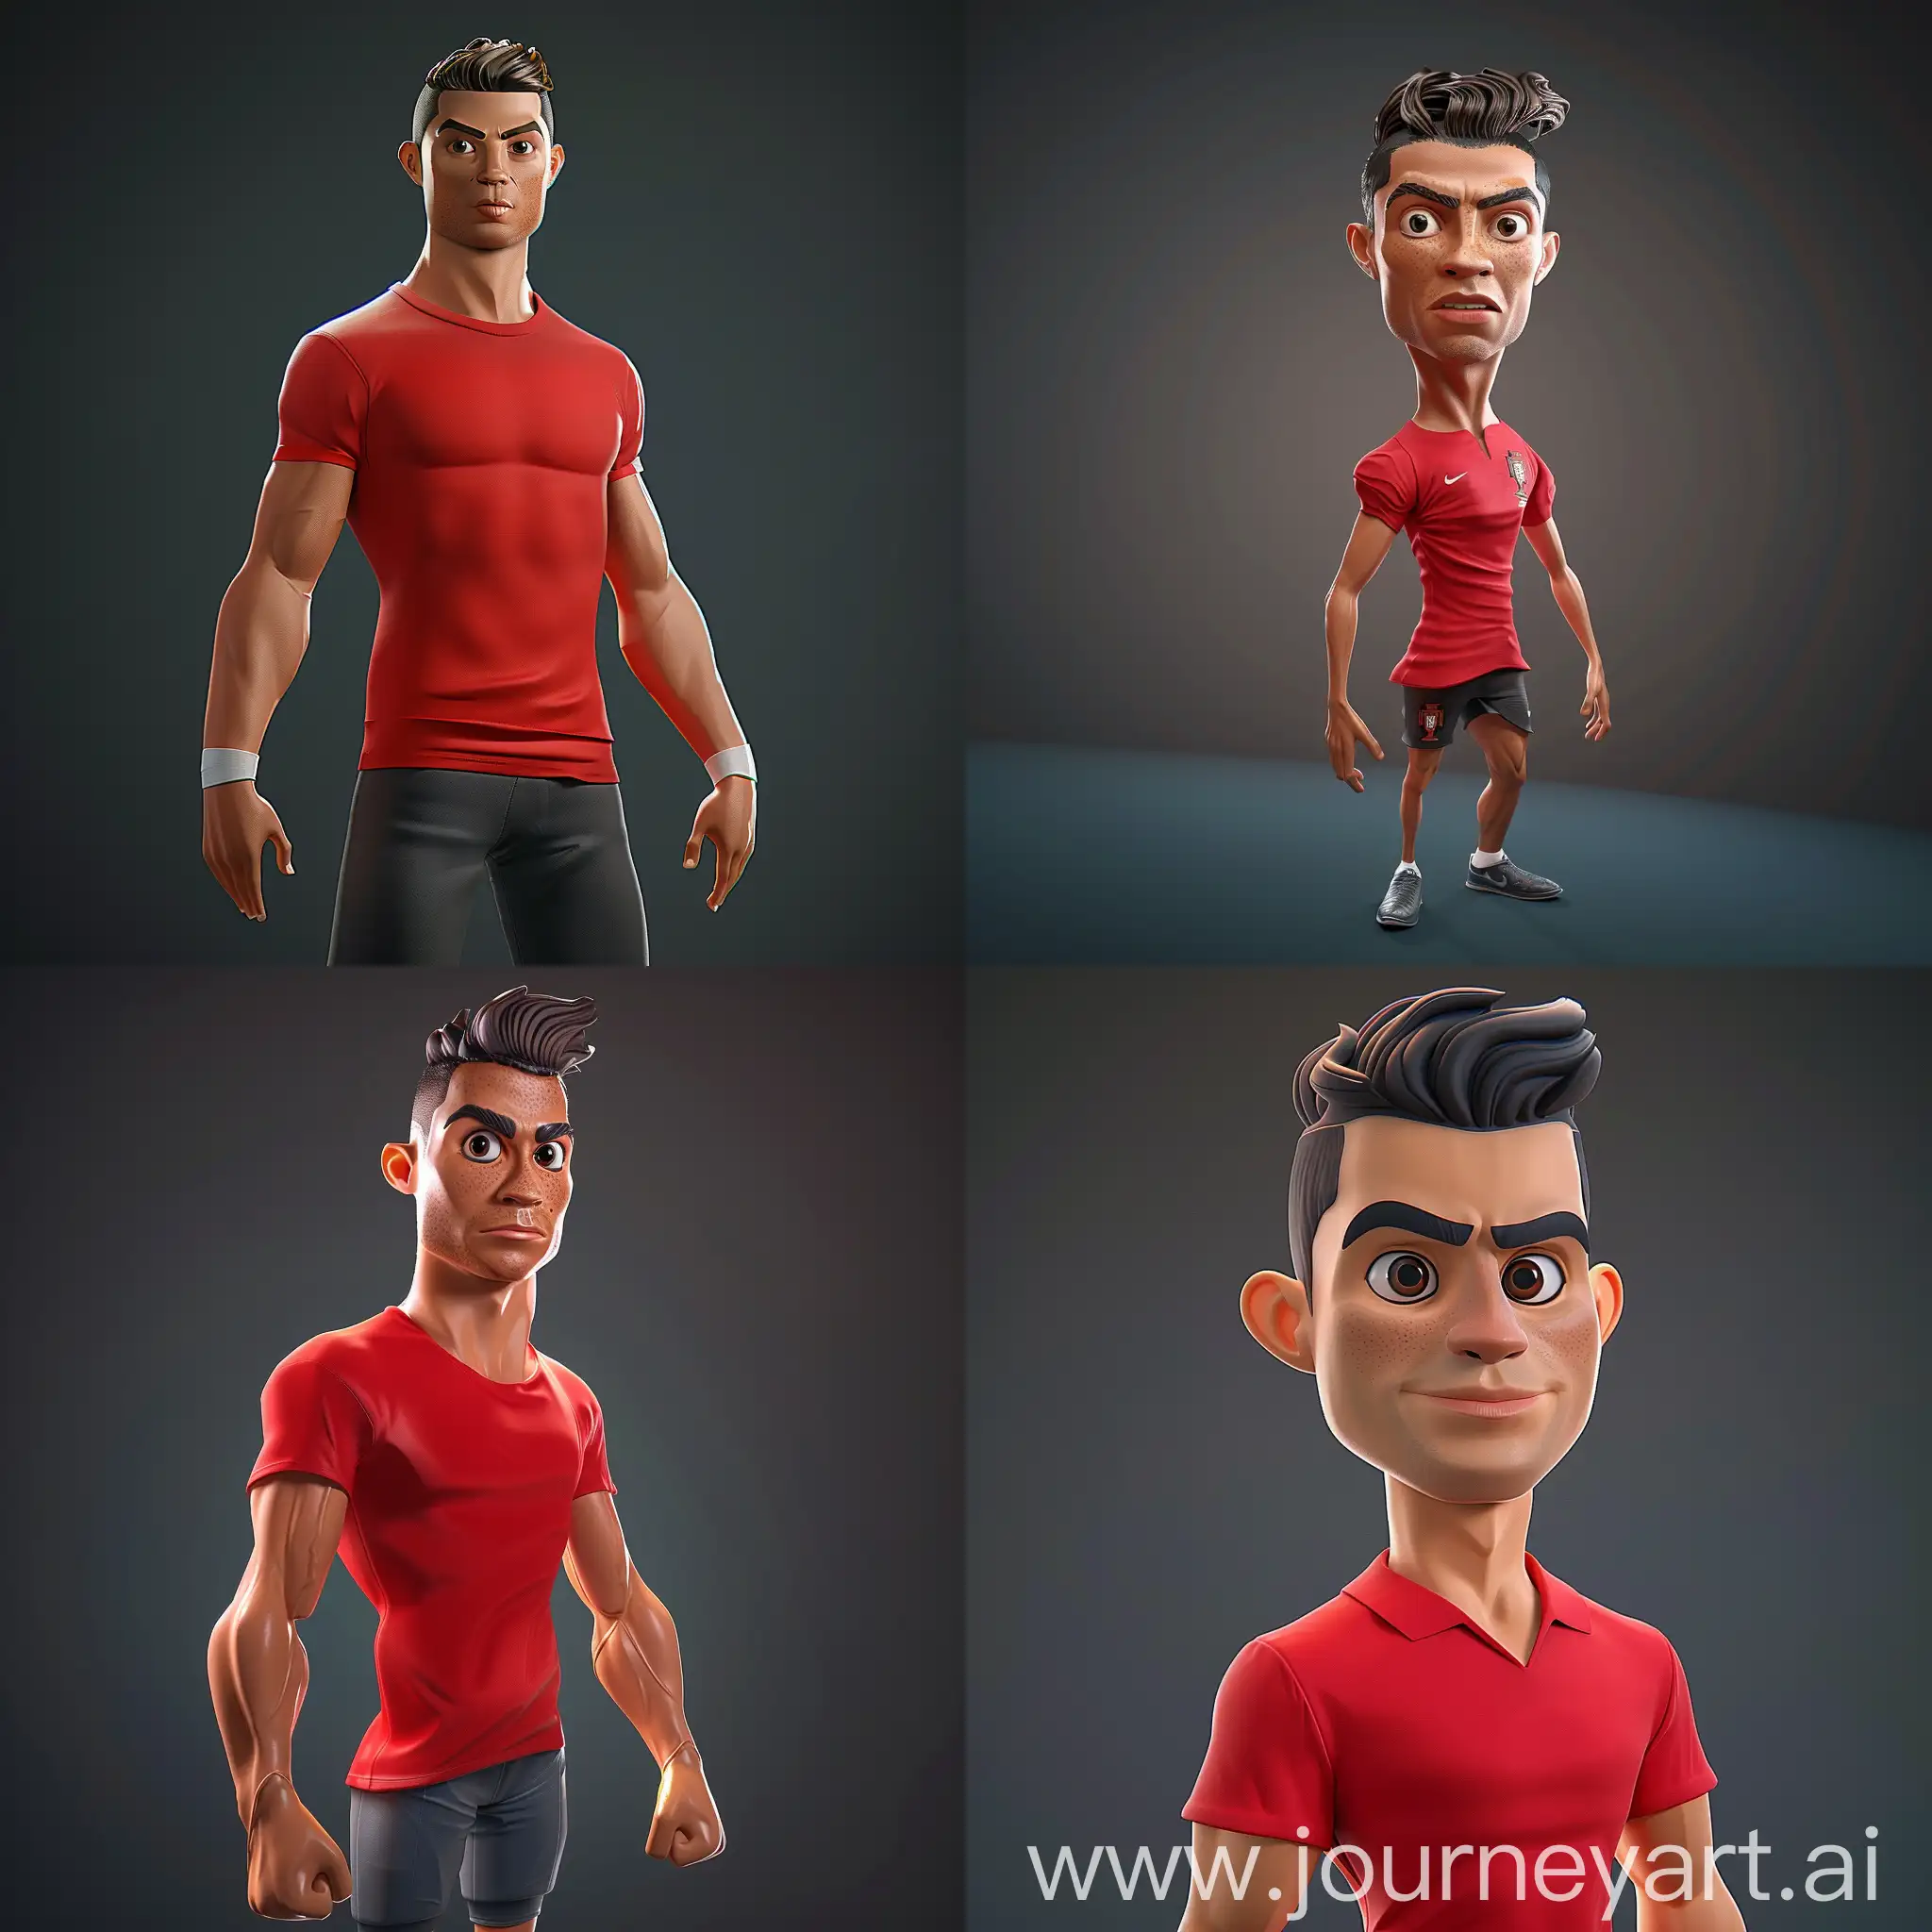 Cristiano-Ronaldo-Cartoon-Character-in-Red-TShirt-Dynamic-3D-Render-on-Dark-Background